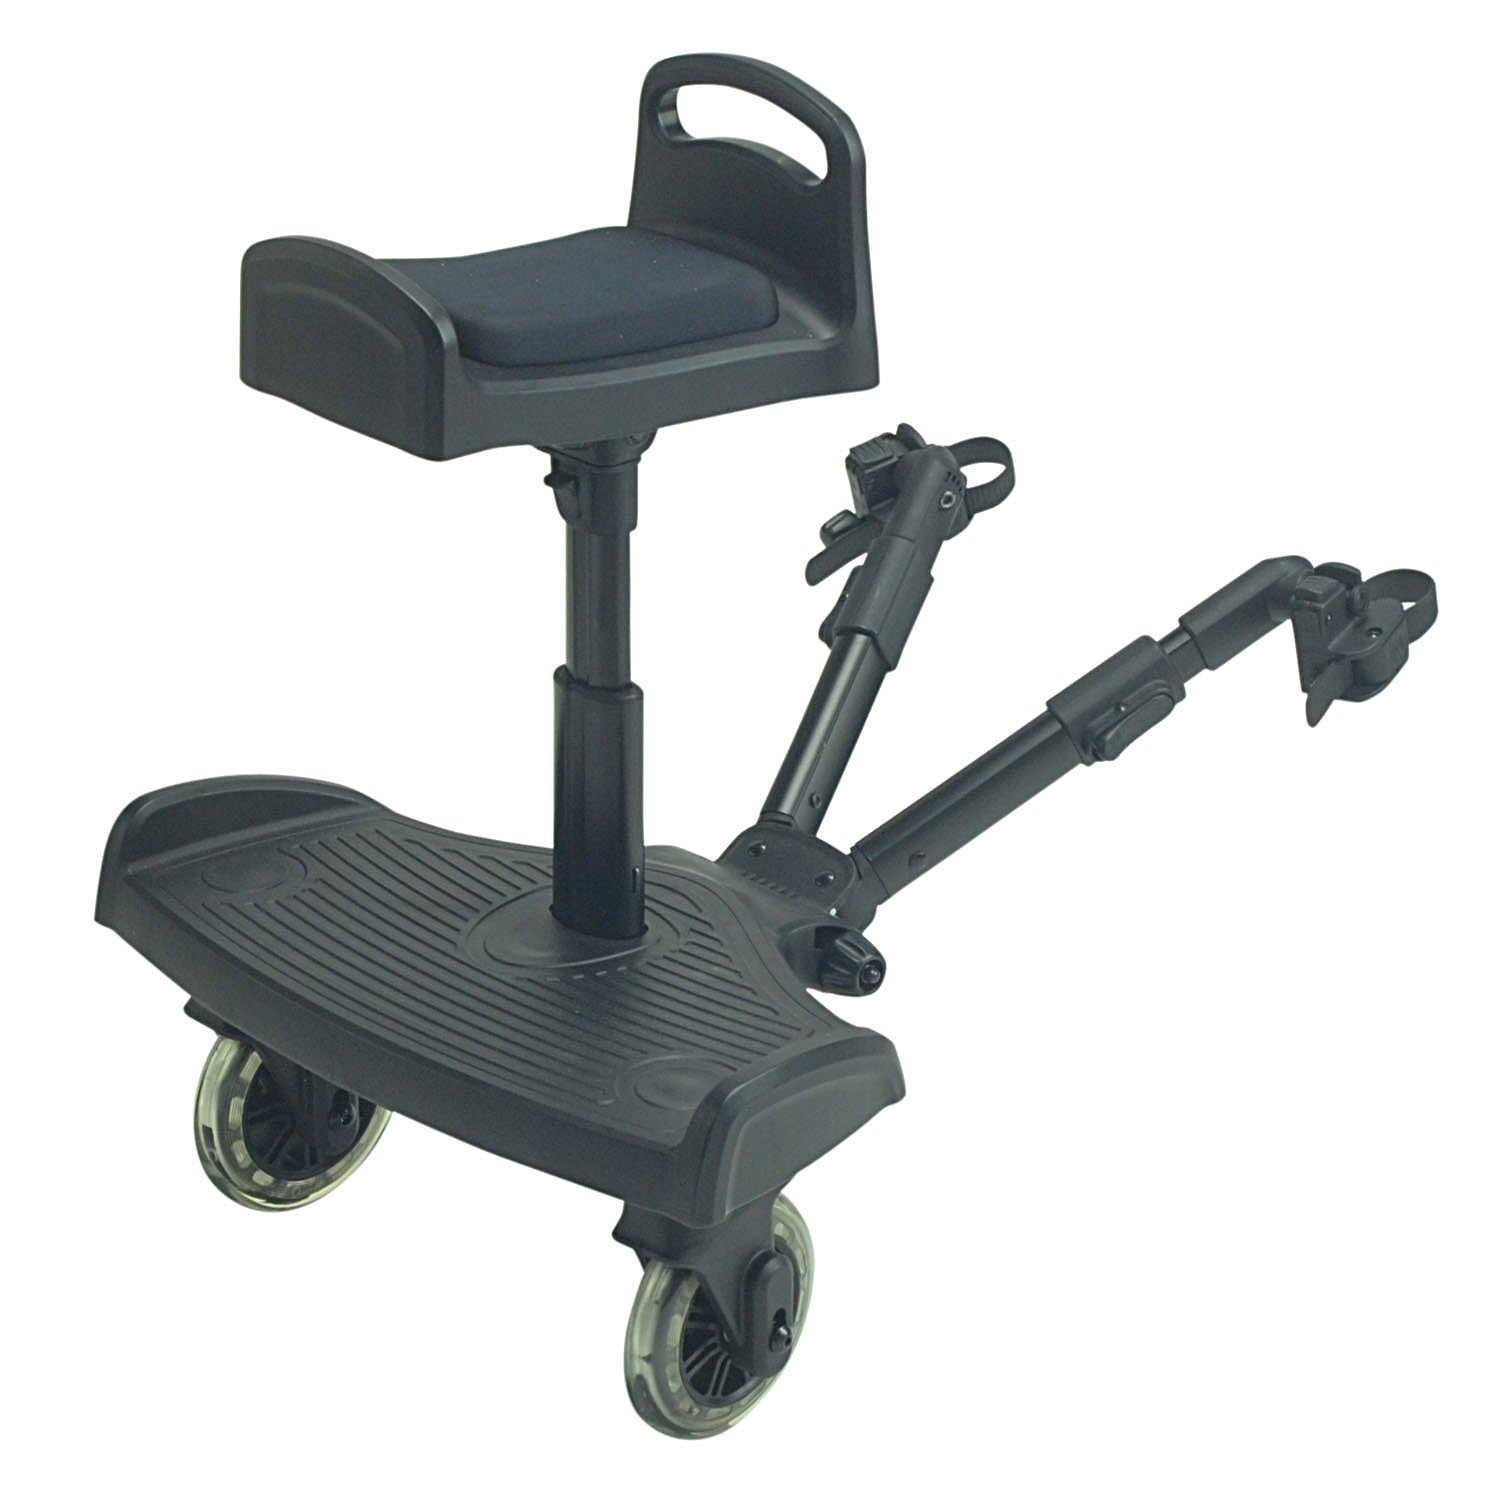 For-Your-Little-Ride On Board Compatible Travel Systems, EasyWalker SKY